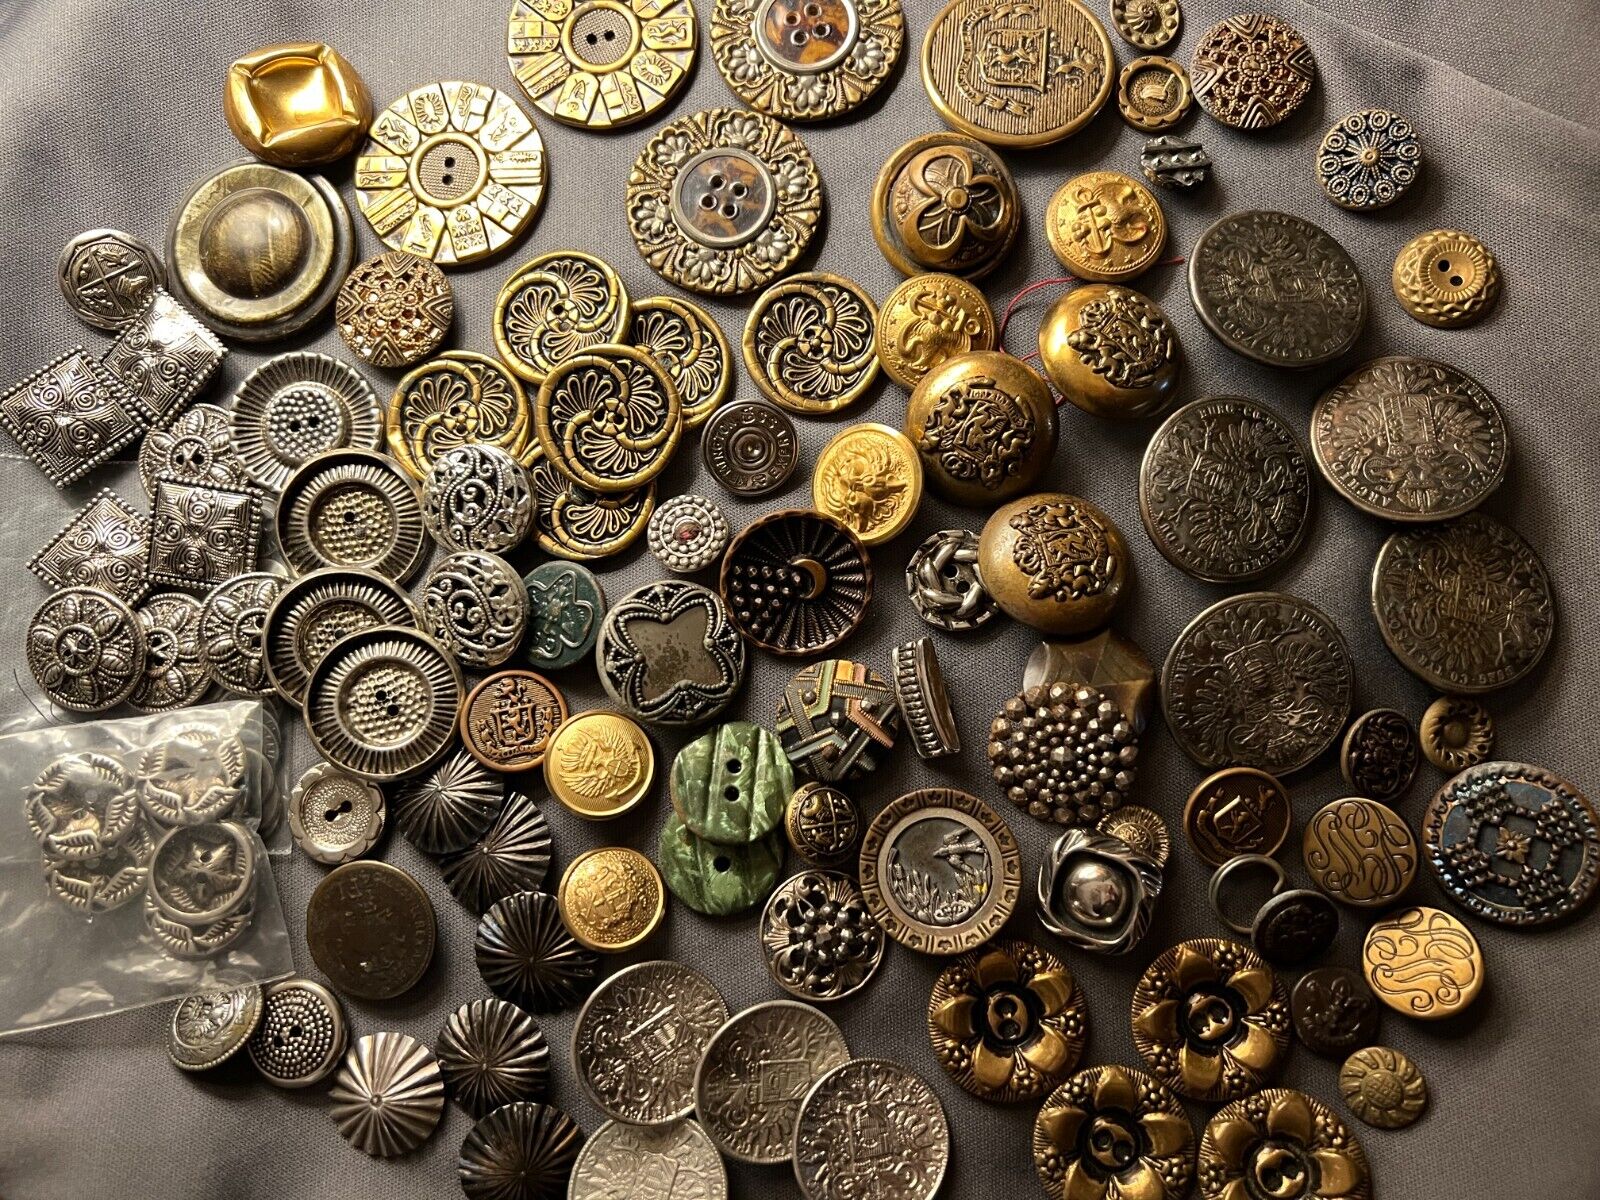 Large Lot 80-100 Vintage Quality Metal Buttons-All Kinds Some Buttons Covers